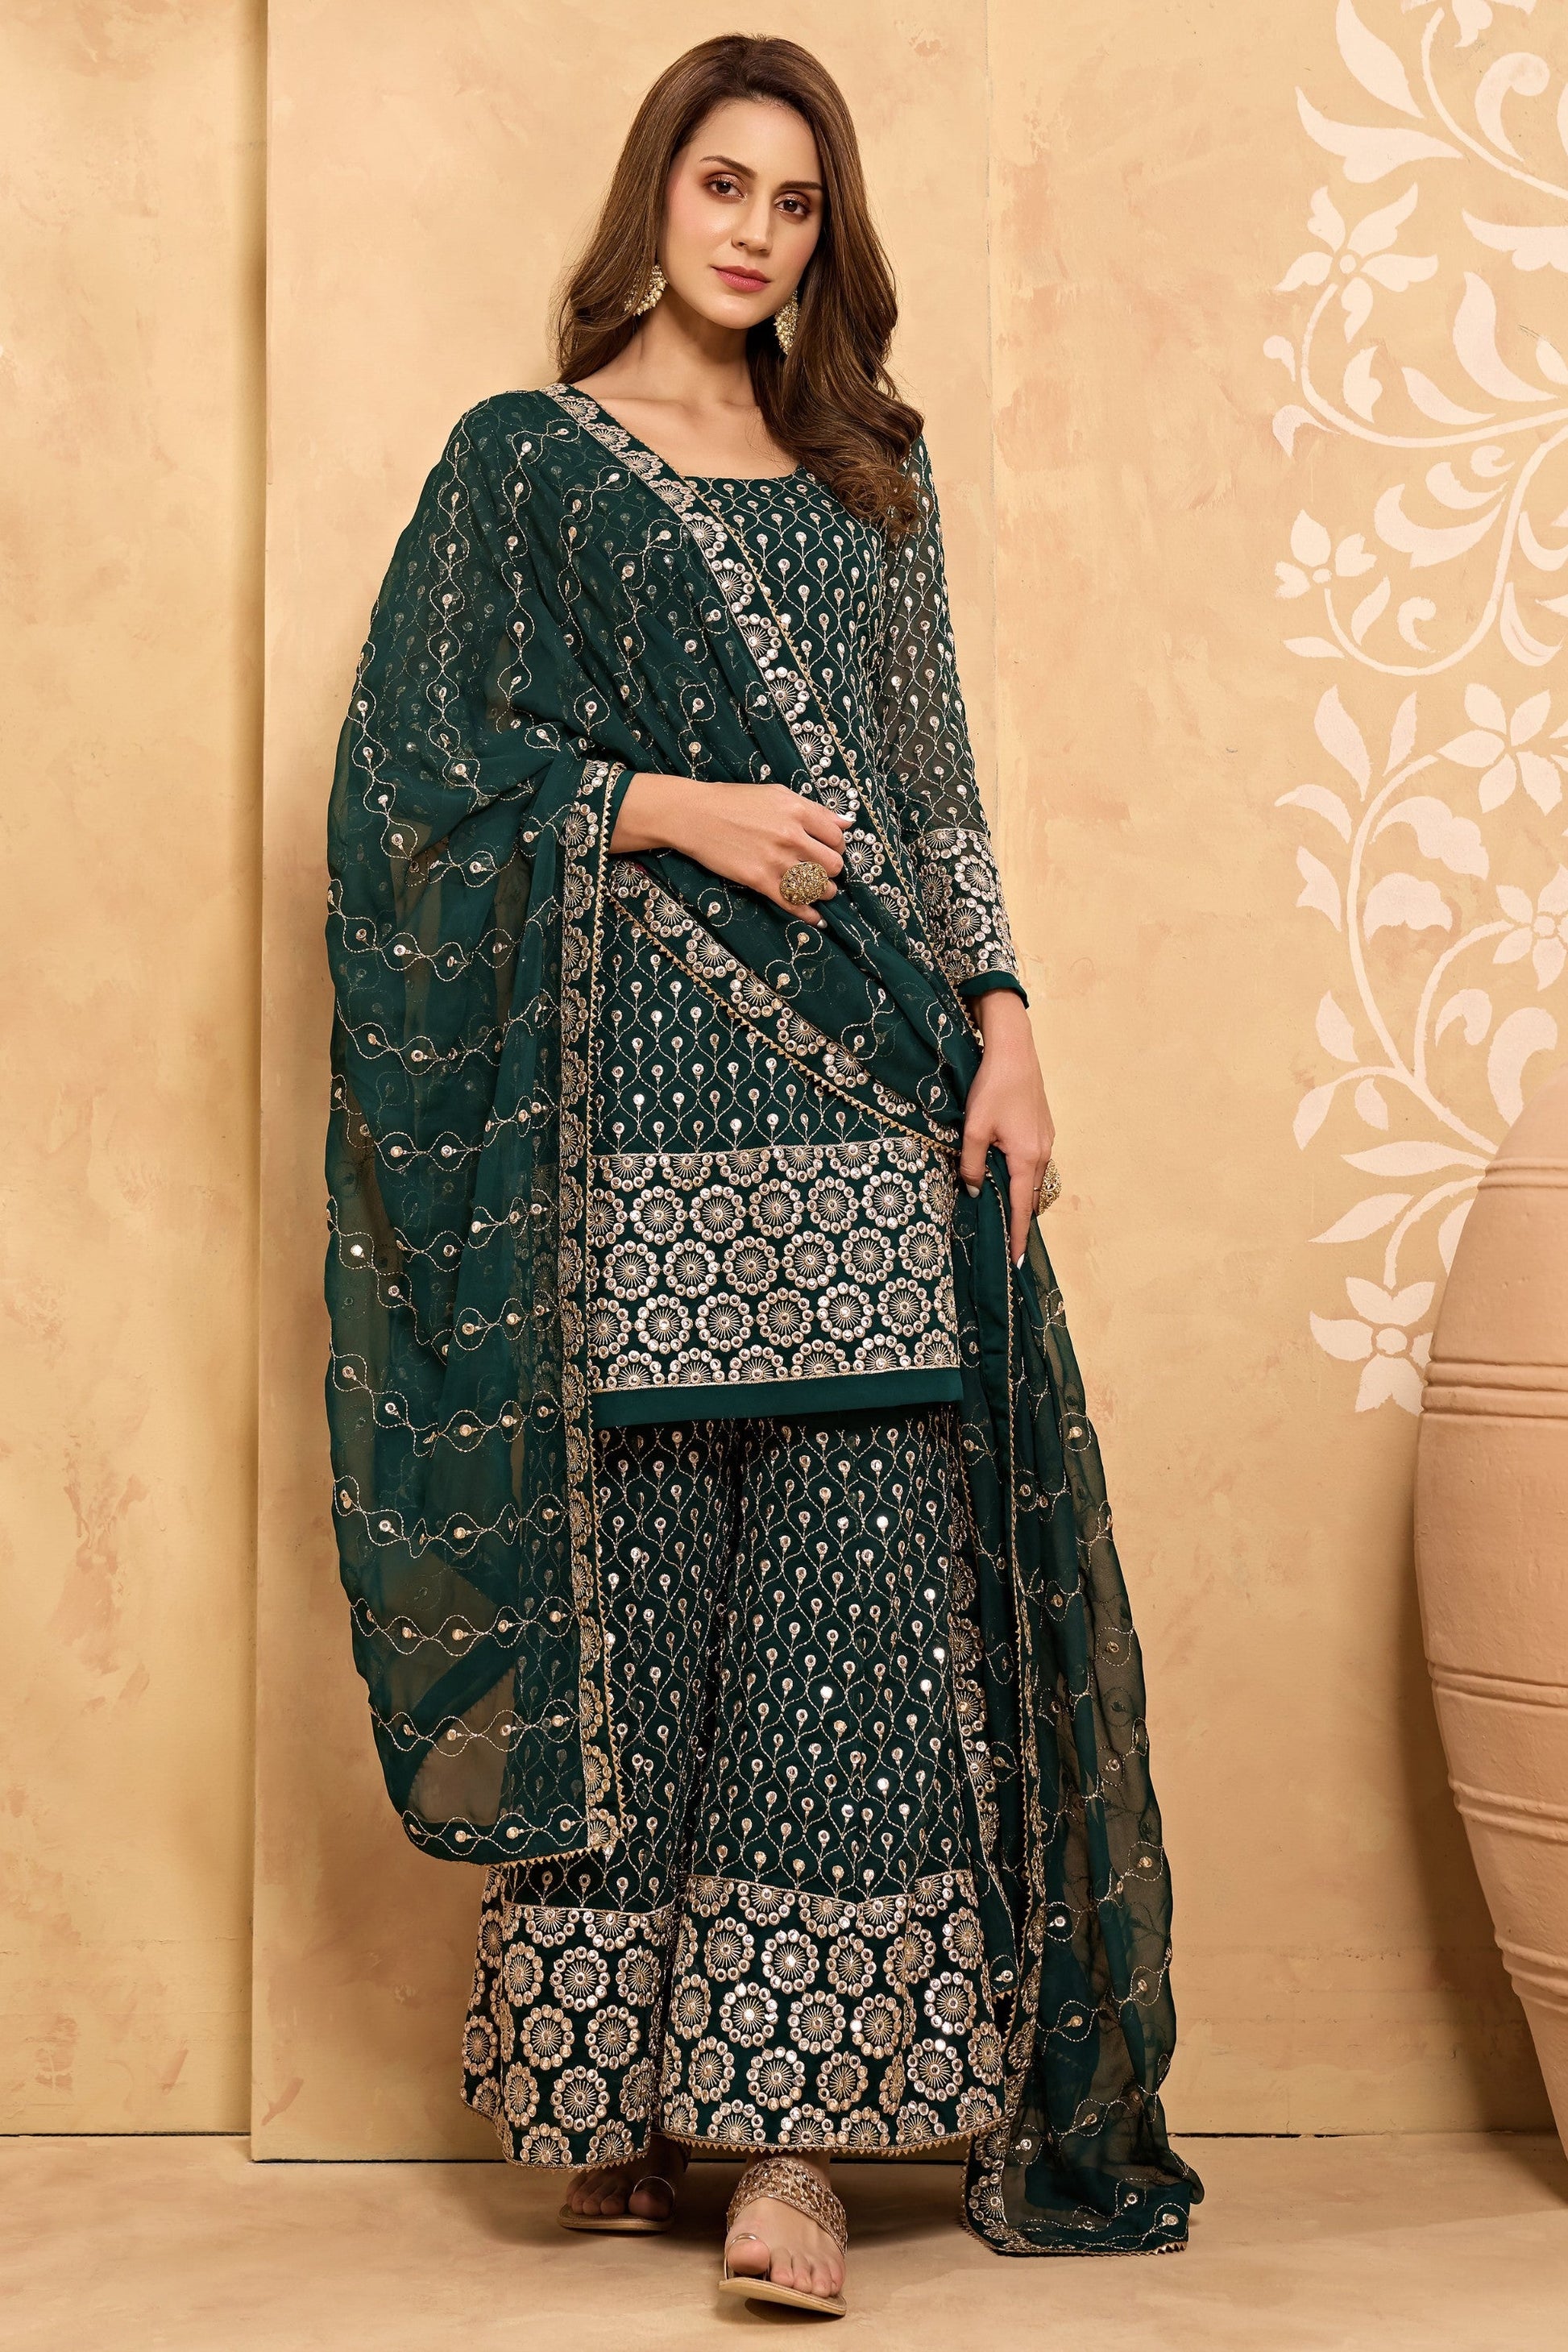 Teal Pakistani Georgette Sharara For Indian Festivals & Weddings - Sequence Embroidery Work, Zari Work